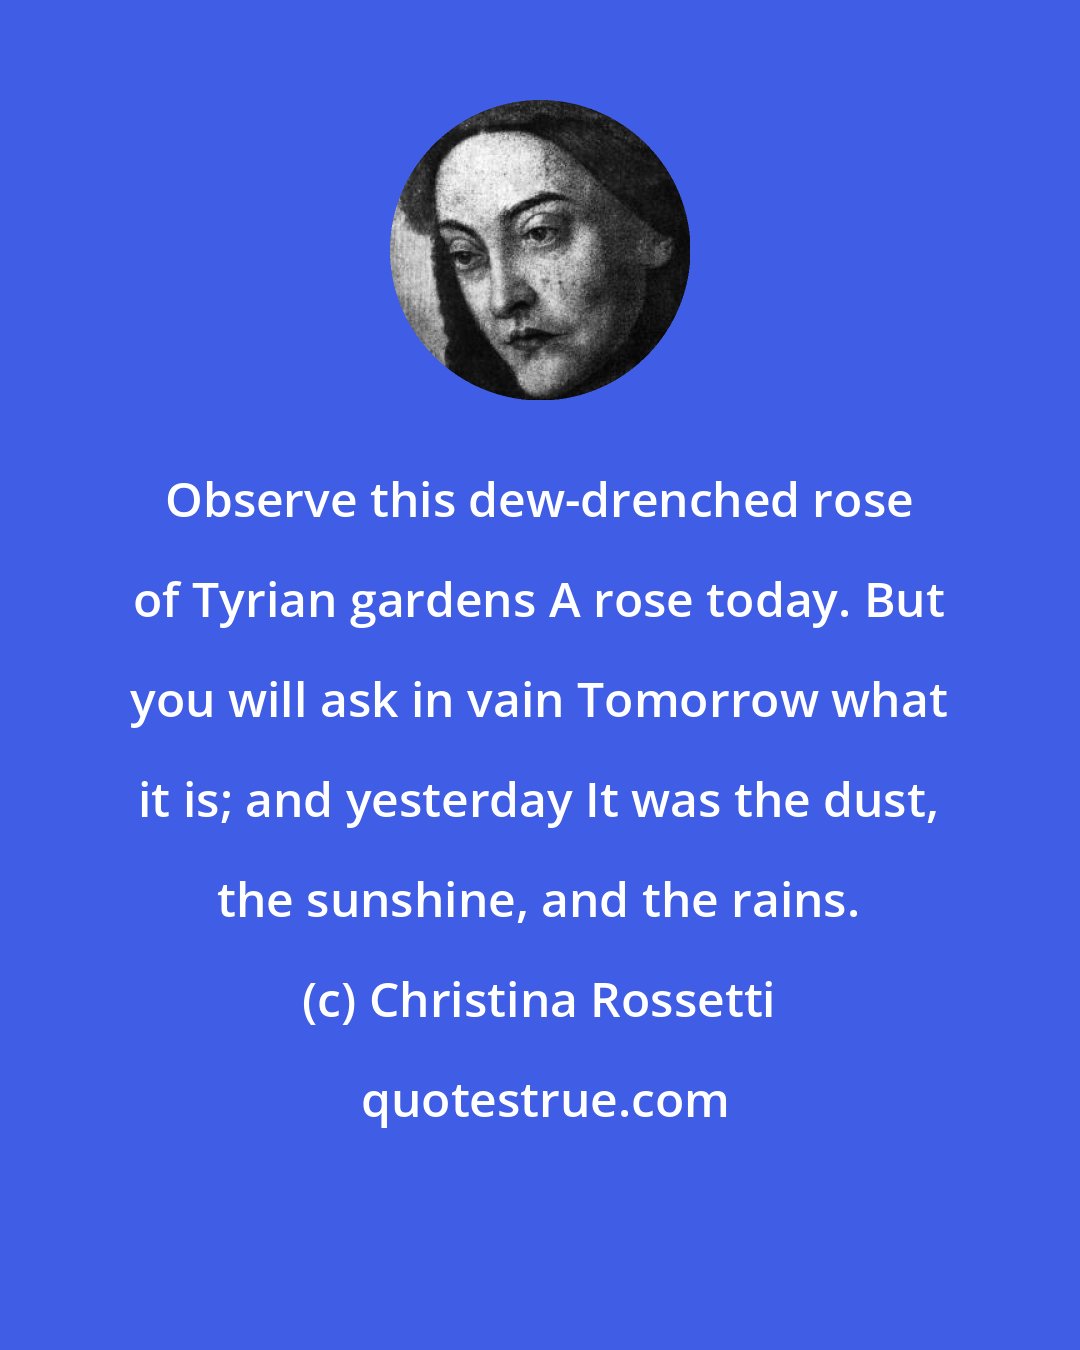 Christina Rossetti: Observe this dew-drenched rose of Tyrian gardens A rose today. But you will ask in vain Tomorrow what it is; and yesterday It was the dust, the sunshine, and the rains.